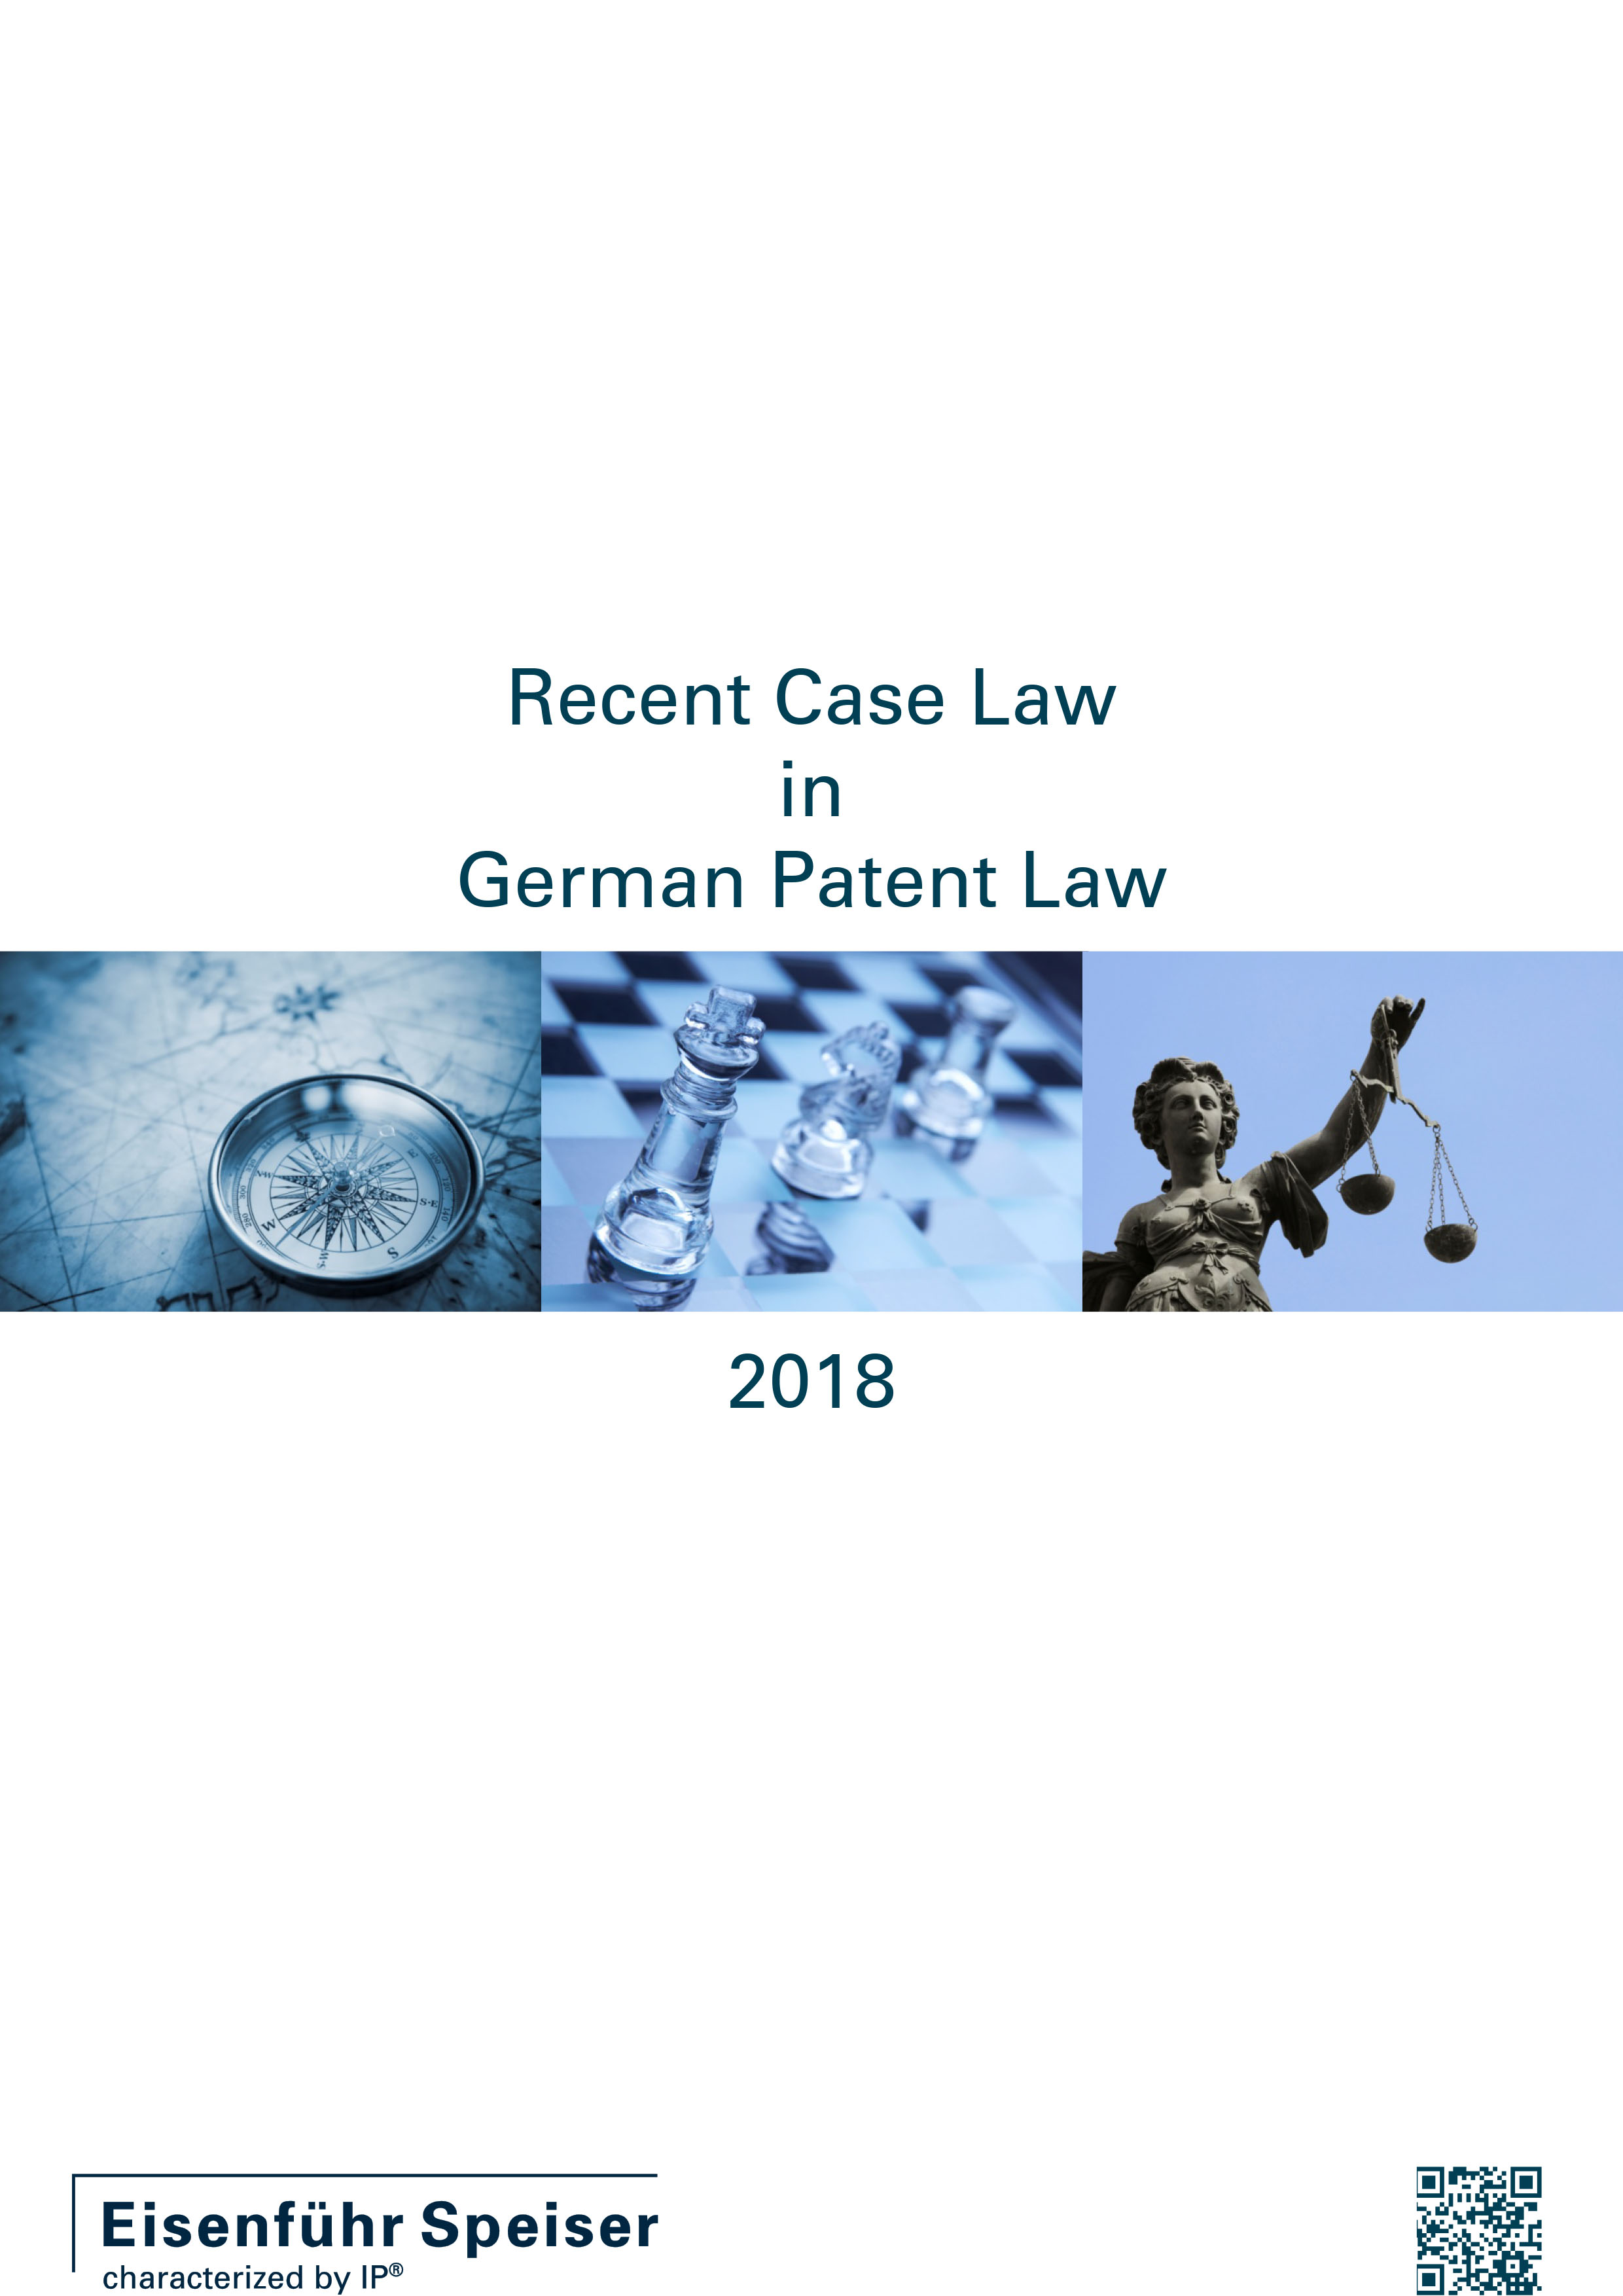 Recent Case Law in German Patent Law 2018